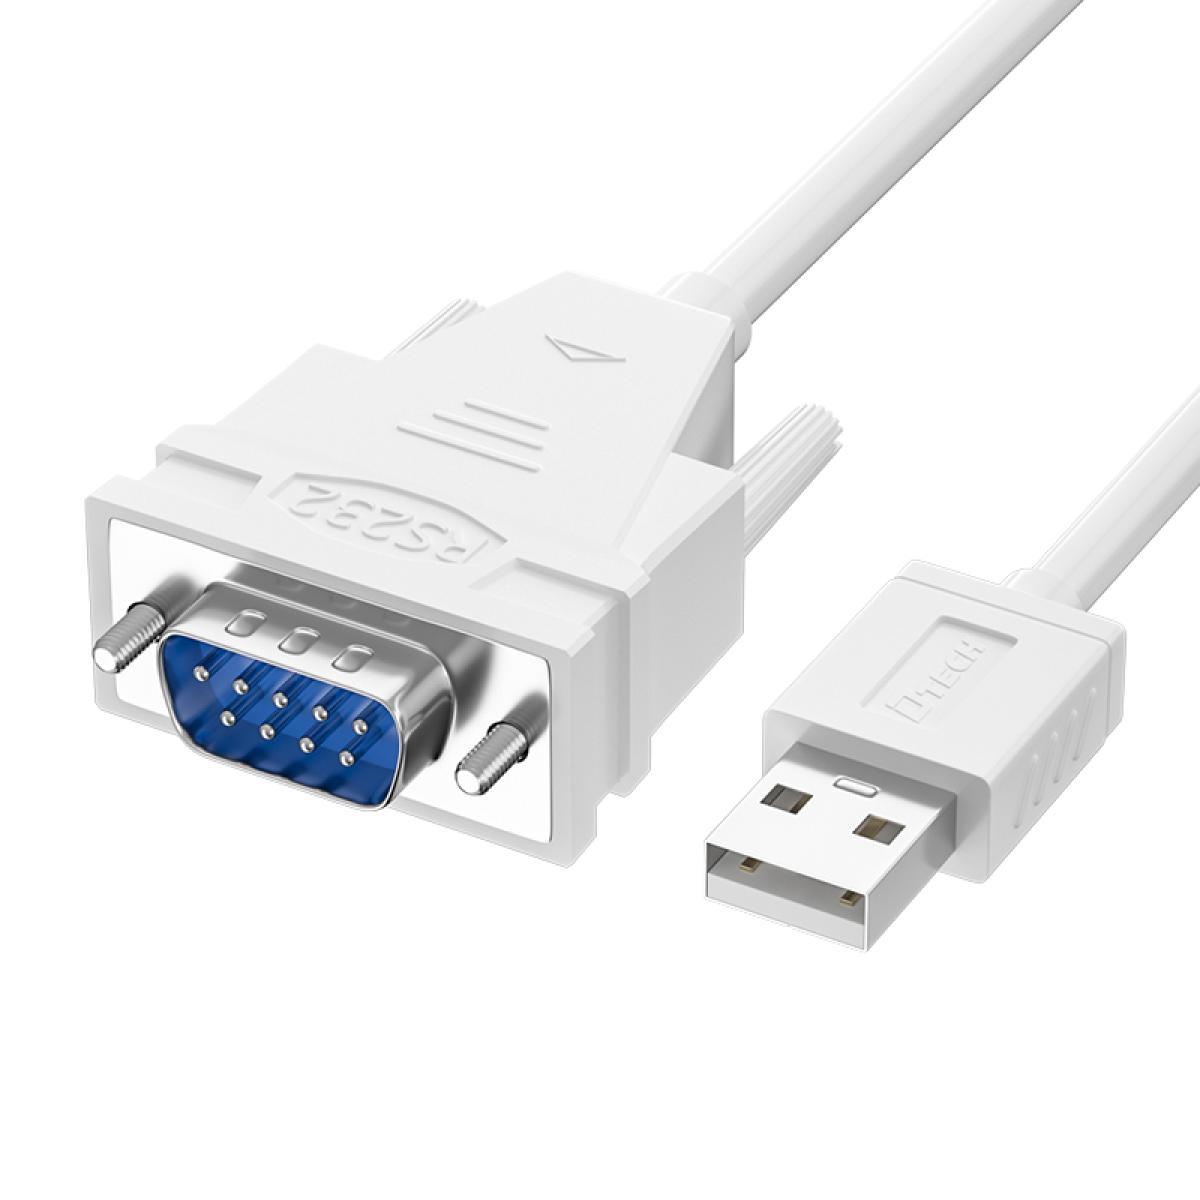 Dtech USB 2.0 to RS232 Serial Cable 1.5M